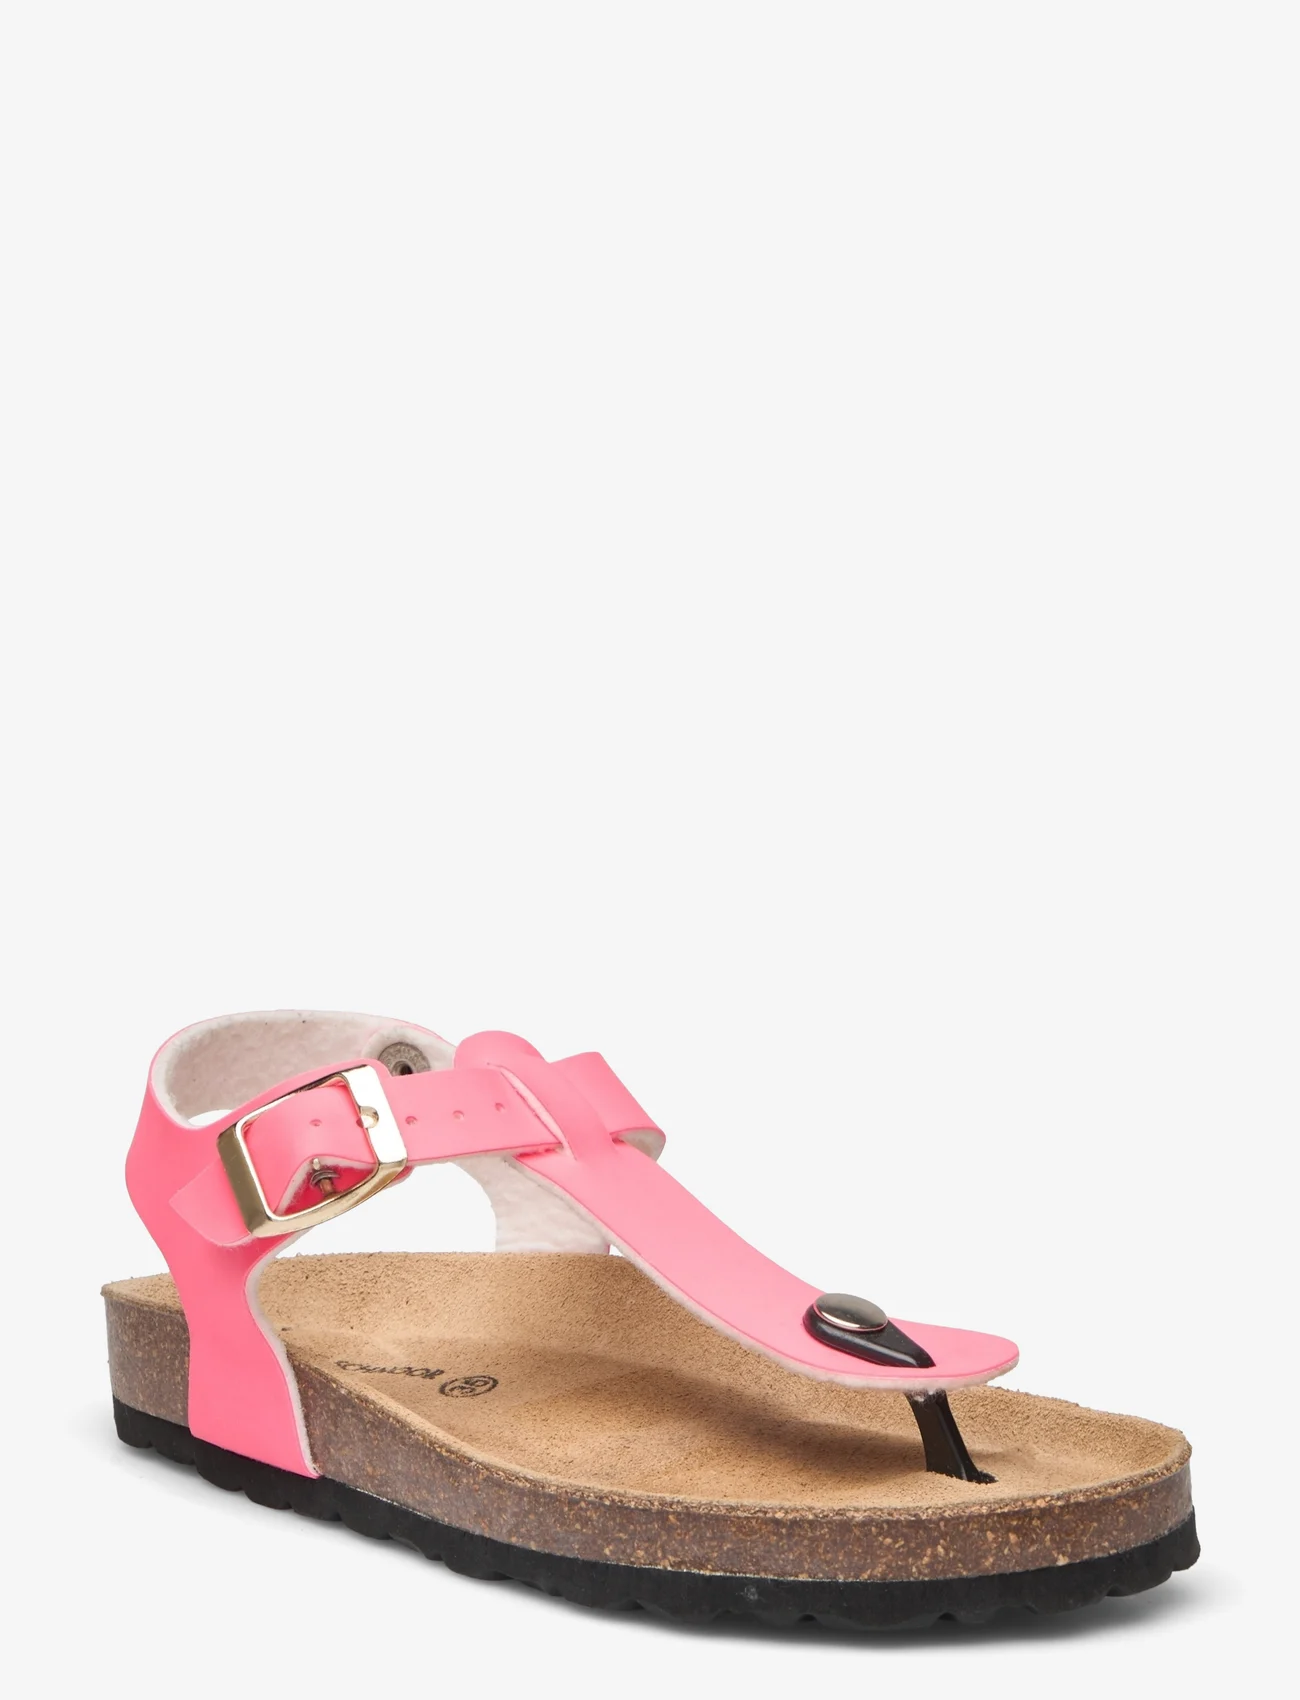 Sofie Schnoor Baby and Kids - Sandal lacquer - sandals - coral pink - 0